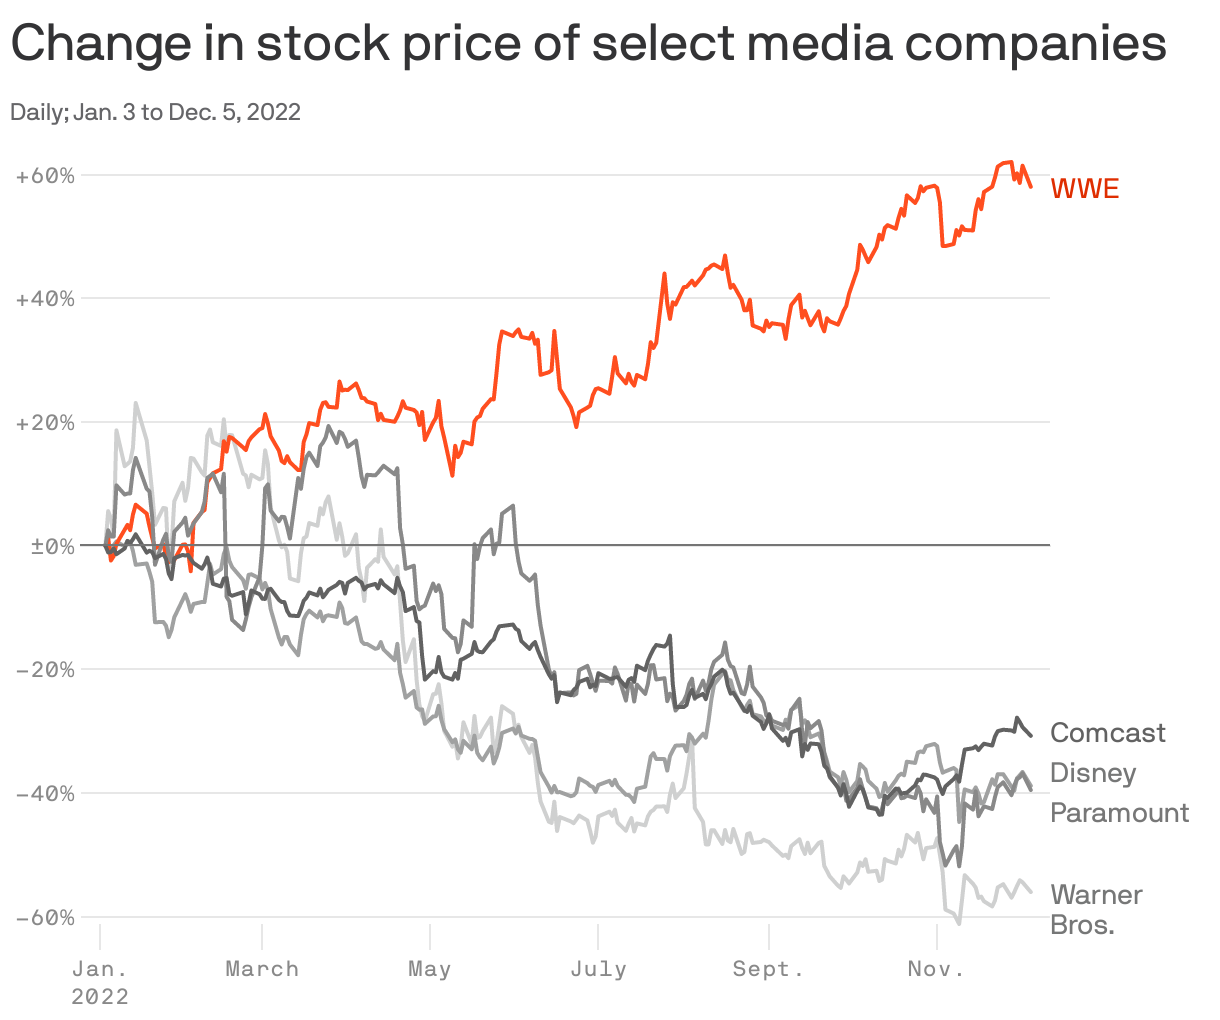 Change in stock price of select media companies